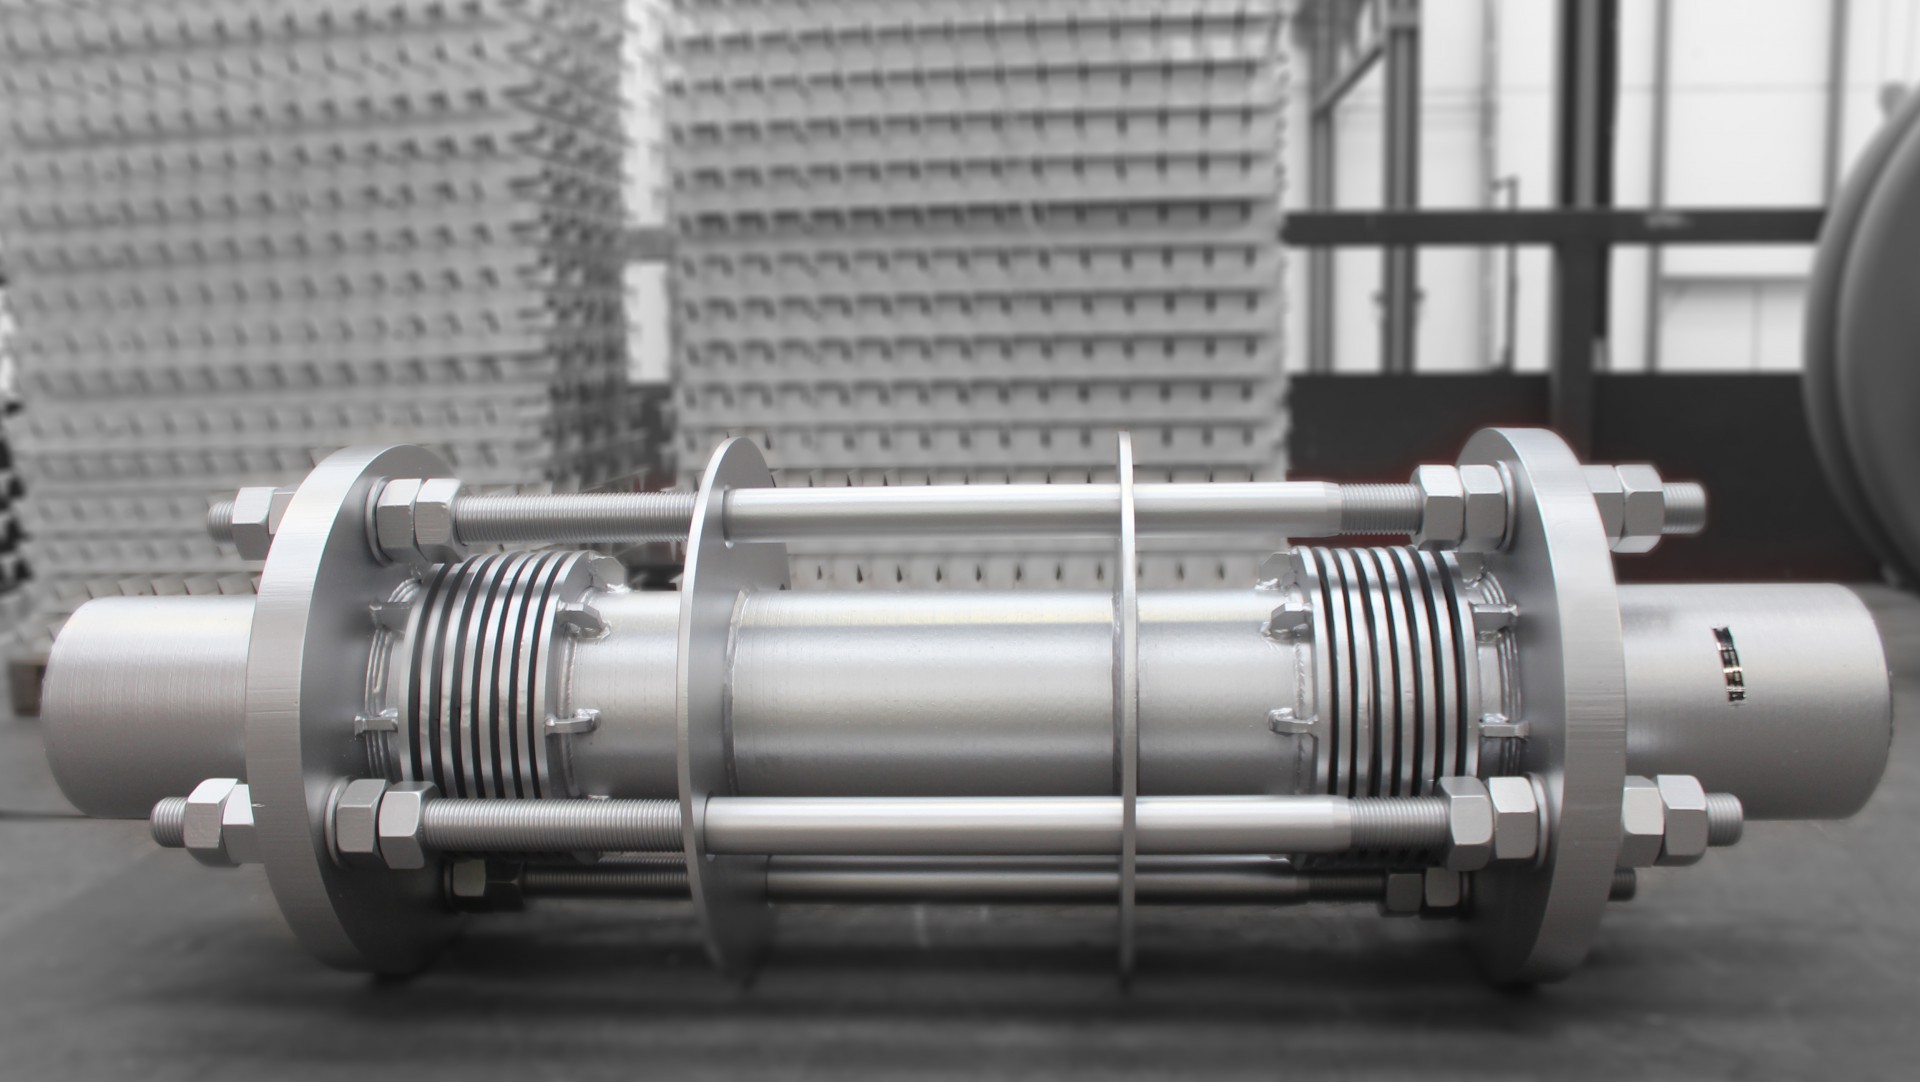 Reinforced high Pressure Expansion Joints for BPGIC 